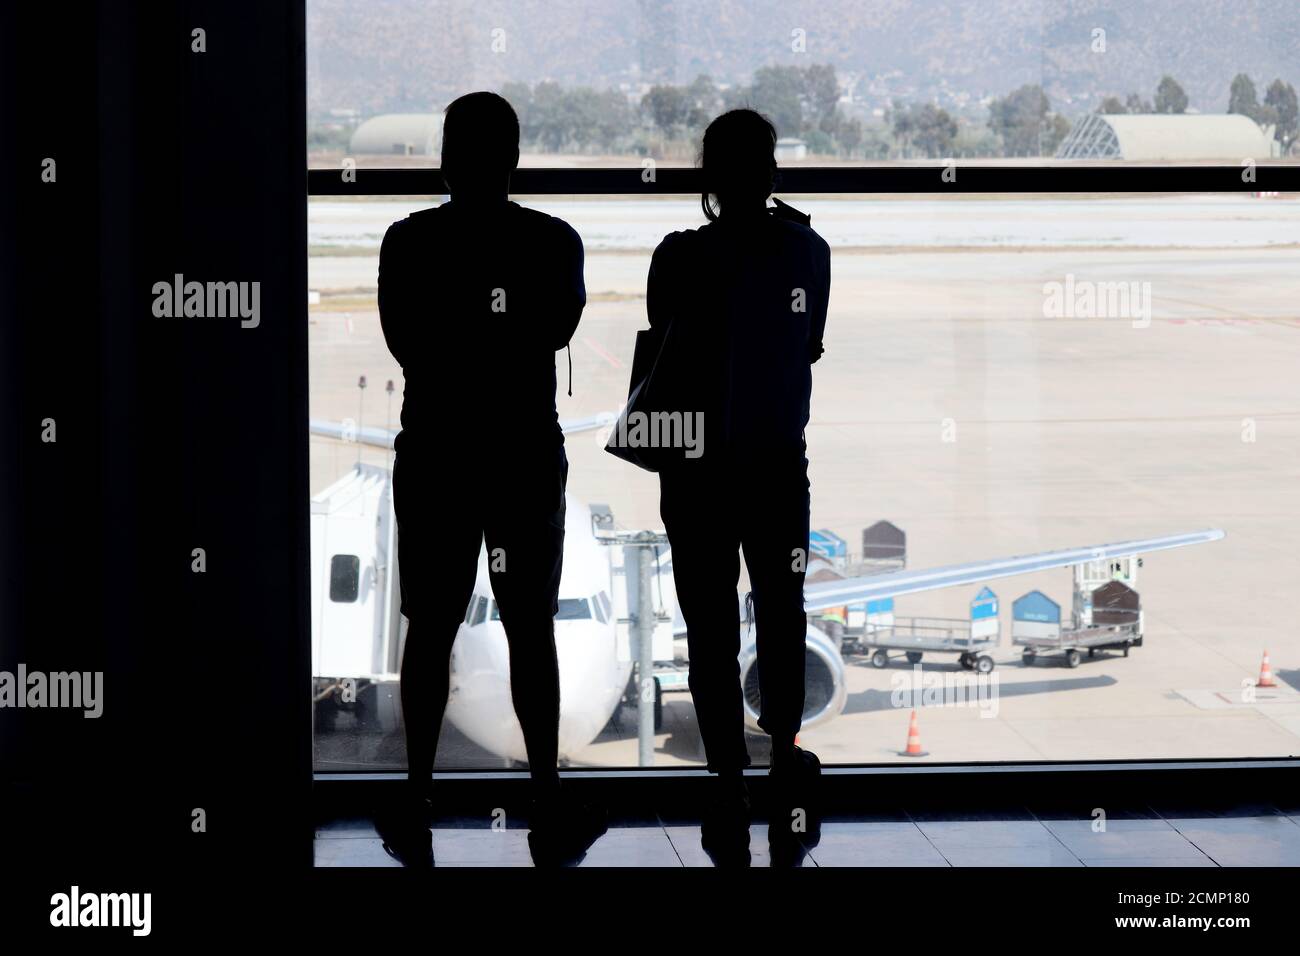 Couple of passengers in the airport, silhouettes of a man and woman in masks looking at the plane on the tarmac through the glass Stock Photo